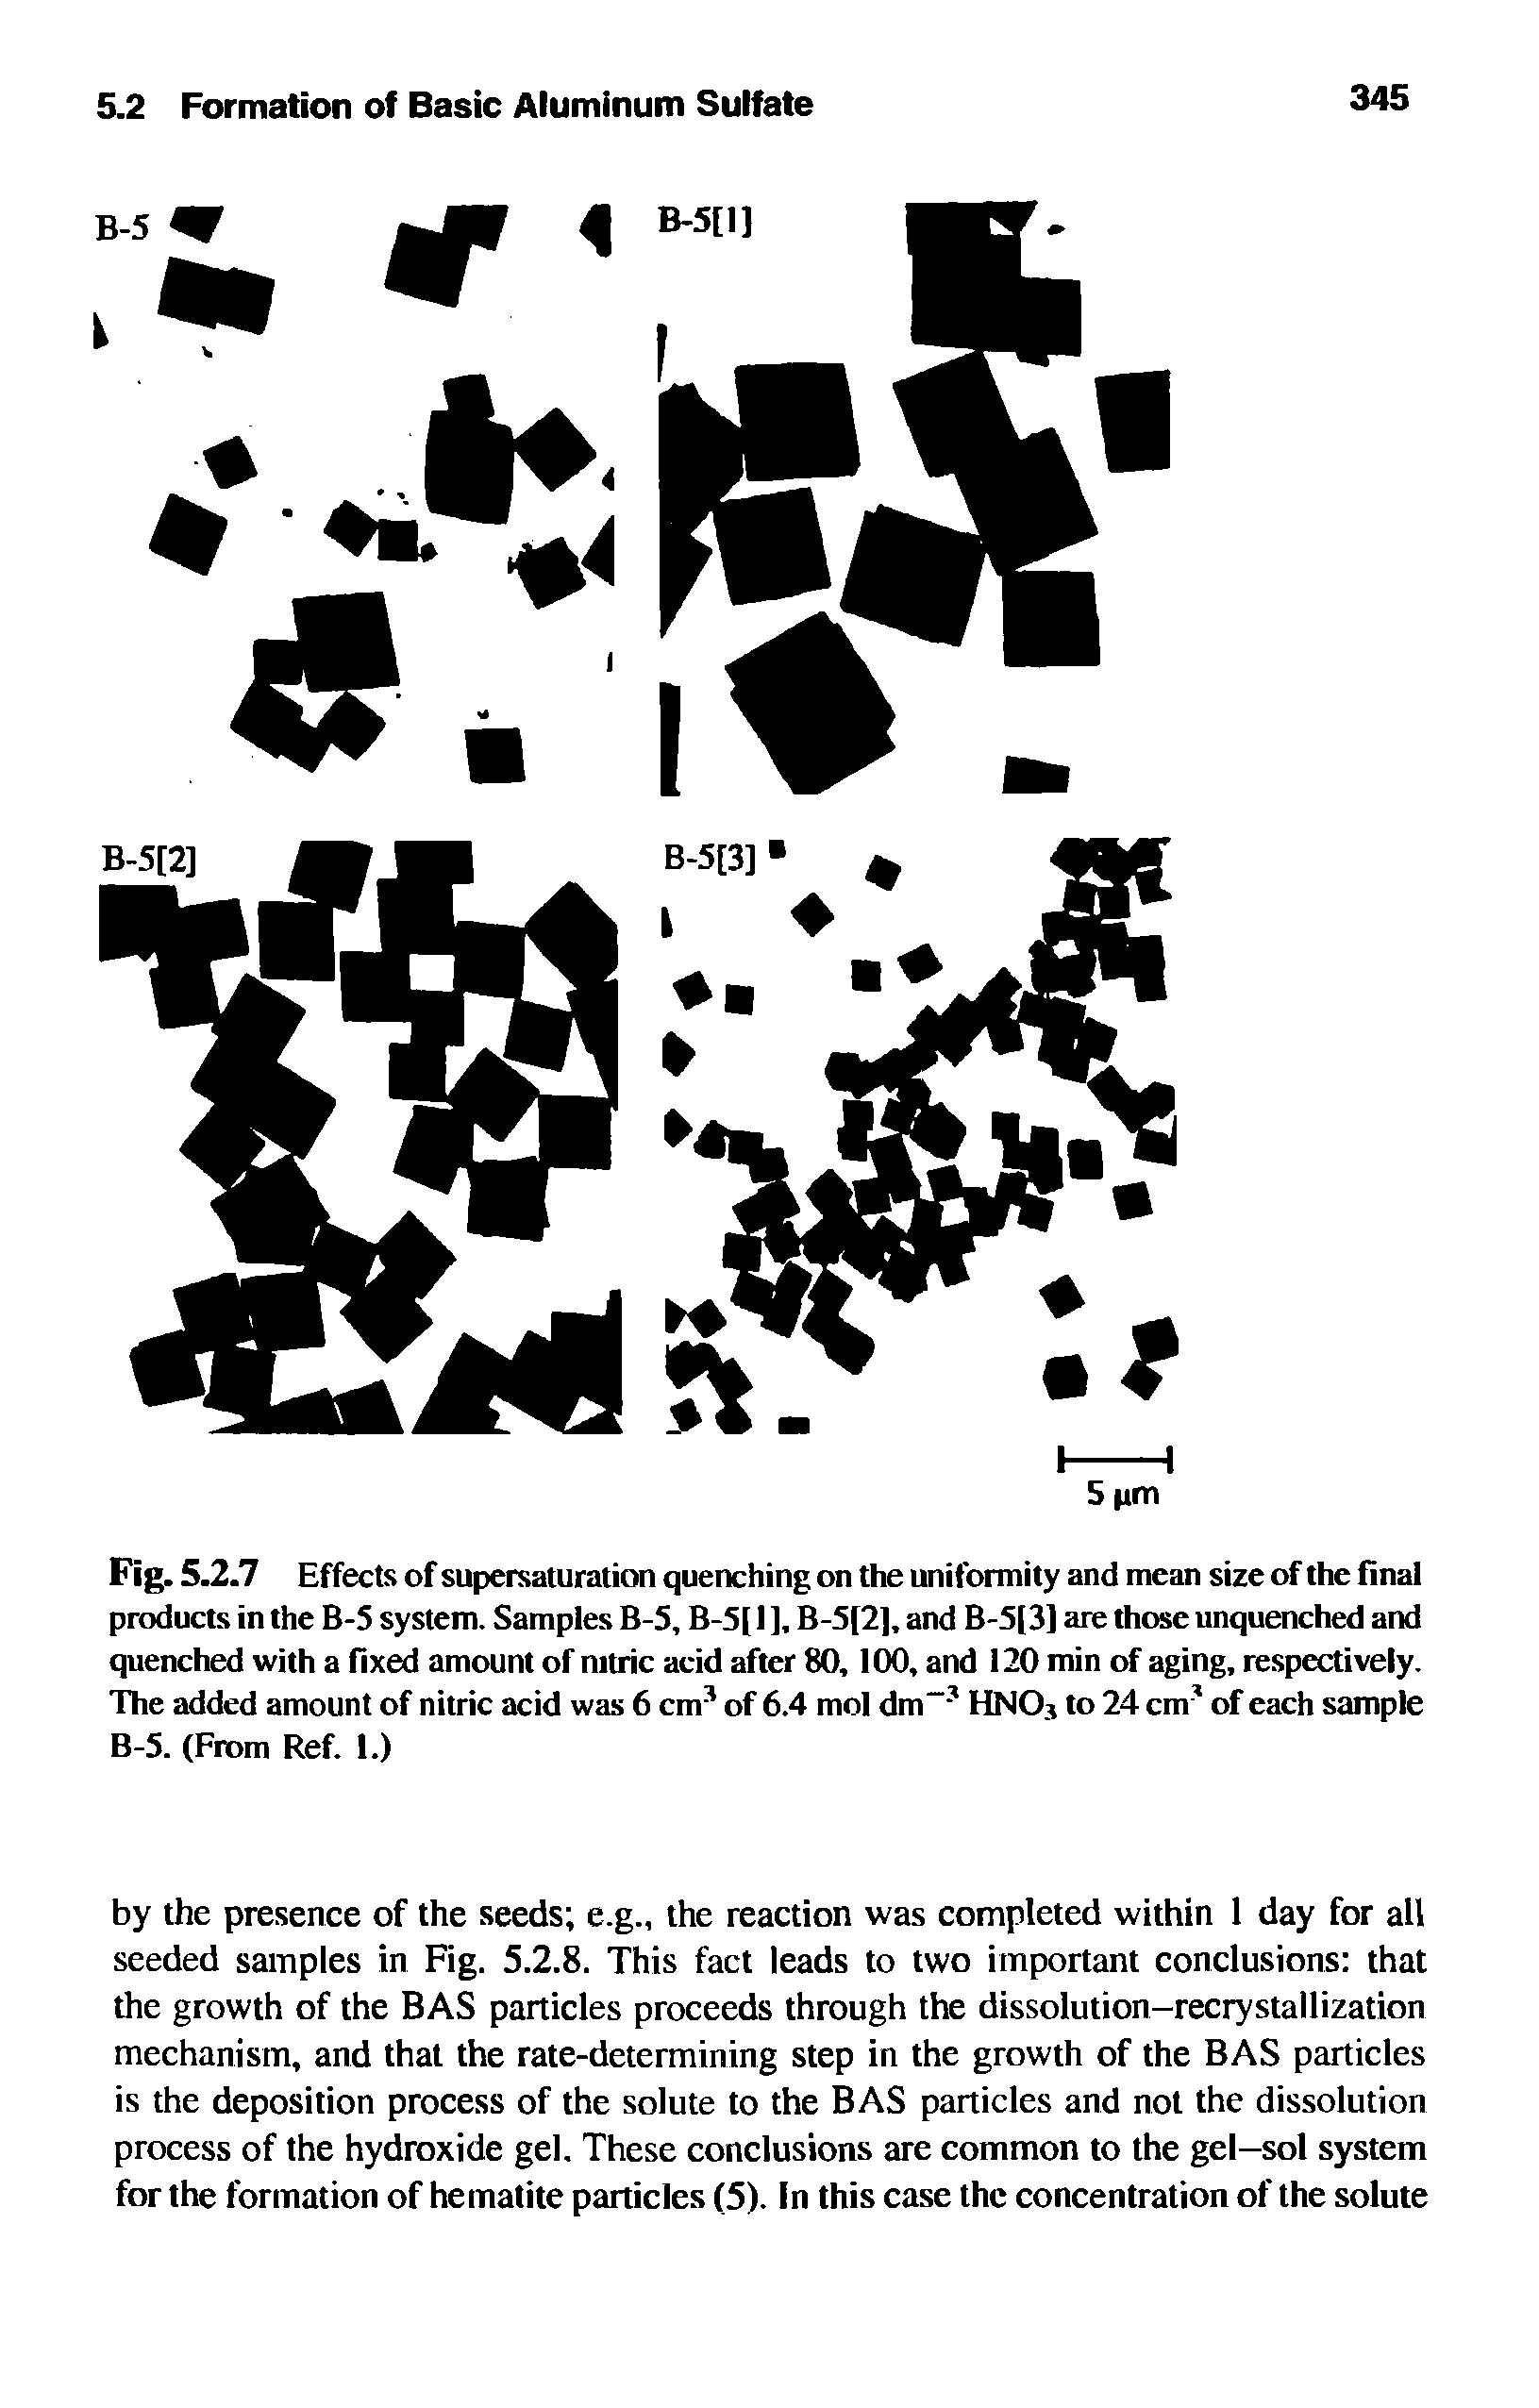 Fig. 5.2.7 Effects of supersaturation quenching on the uniformity and mean size of the final products in the B-5 system. Samples B-5, B-5[ 1 ], B-5[2], and B-5[3] are those unquenched and quenched with a fixed amount of nitric acid after 80,100, and 120 min of aging, respectively. The added amount of nitric acid was 6 cm3 of 6.4 mol dm-3 HNOj to 24 cm3 of each sample B-5. (From Ref. 1.)...